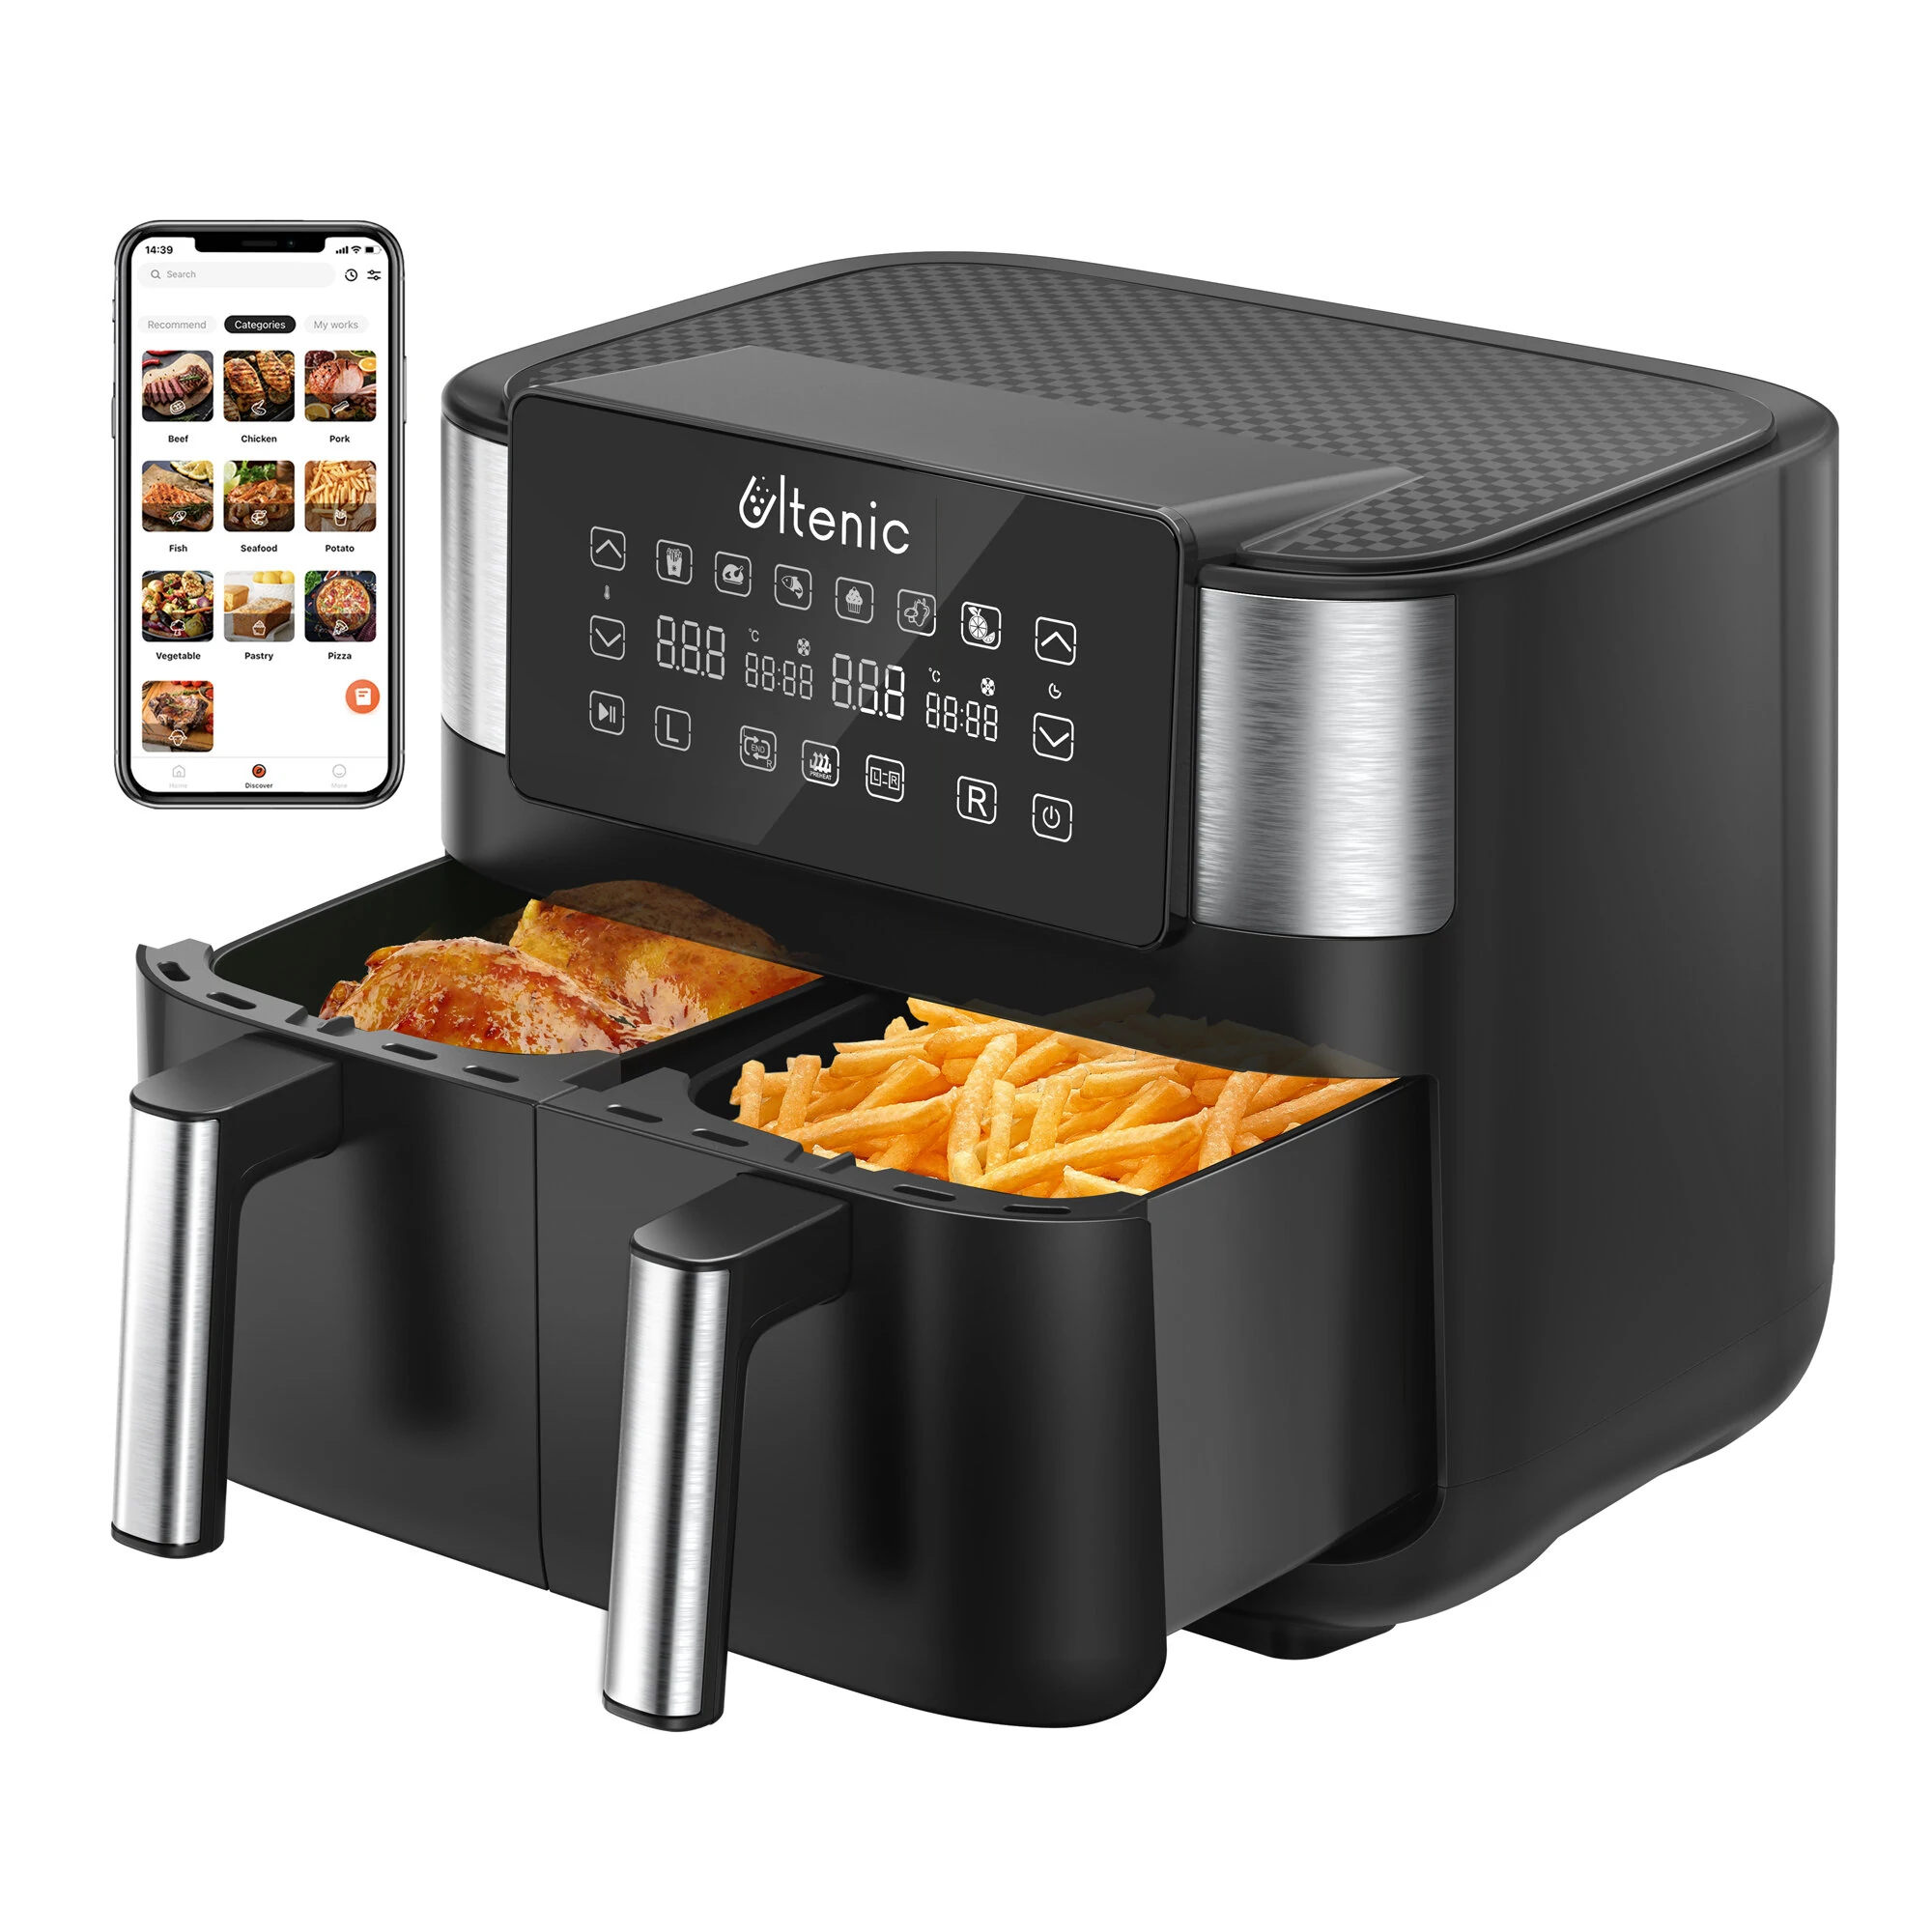 Ultenic K20 Dual Zone Air Fryer Online Recipes 8L Large Capacity Sync Finish Function